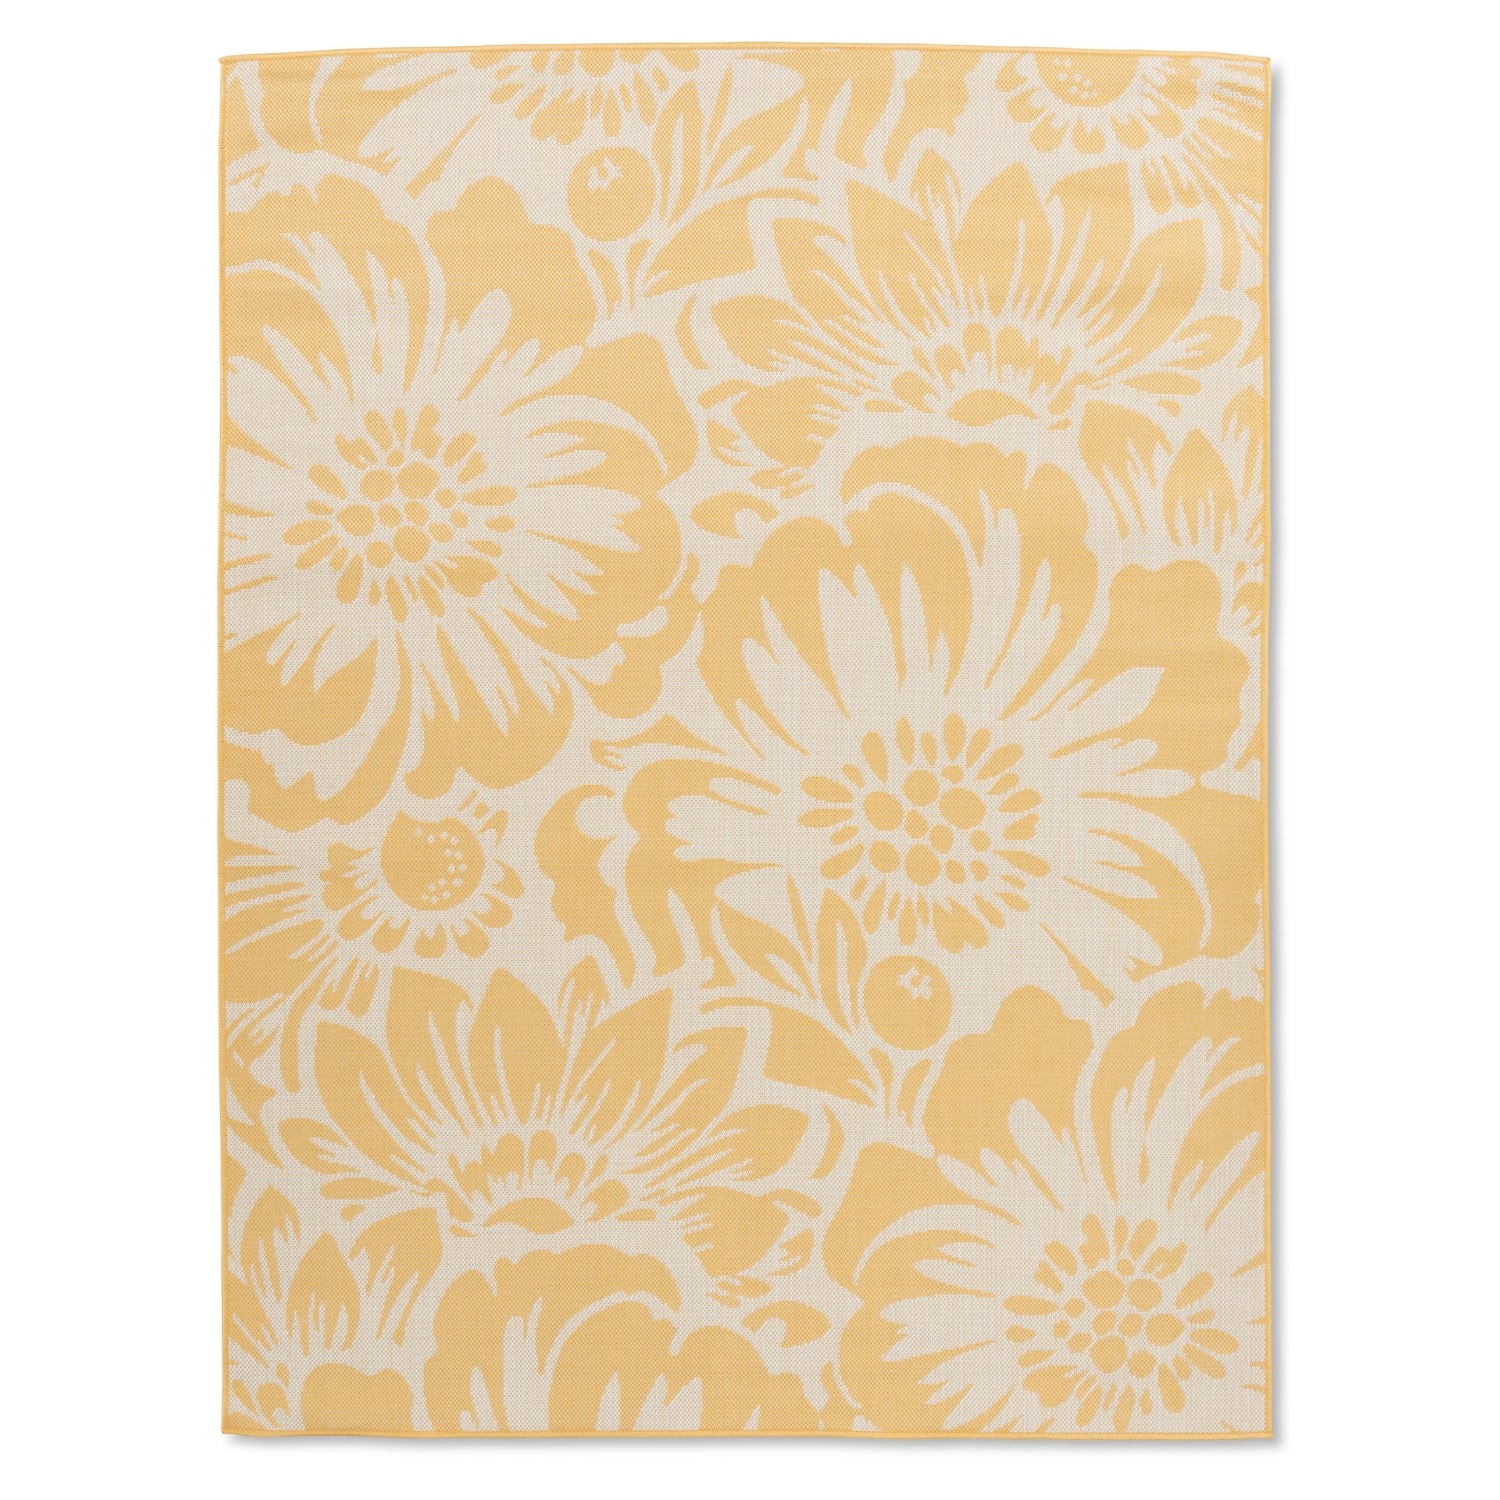 Easy Rugs Belize Modern Floral Yellow Weiss Patio Outdoor Rug